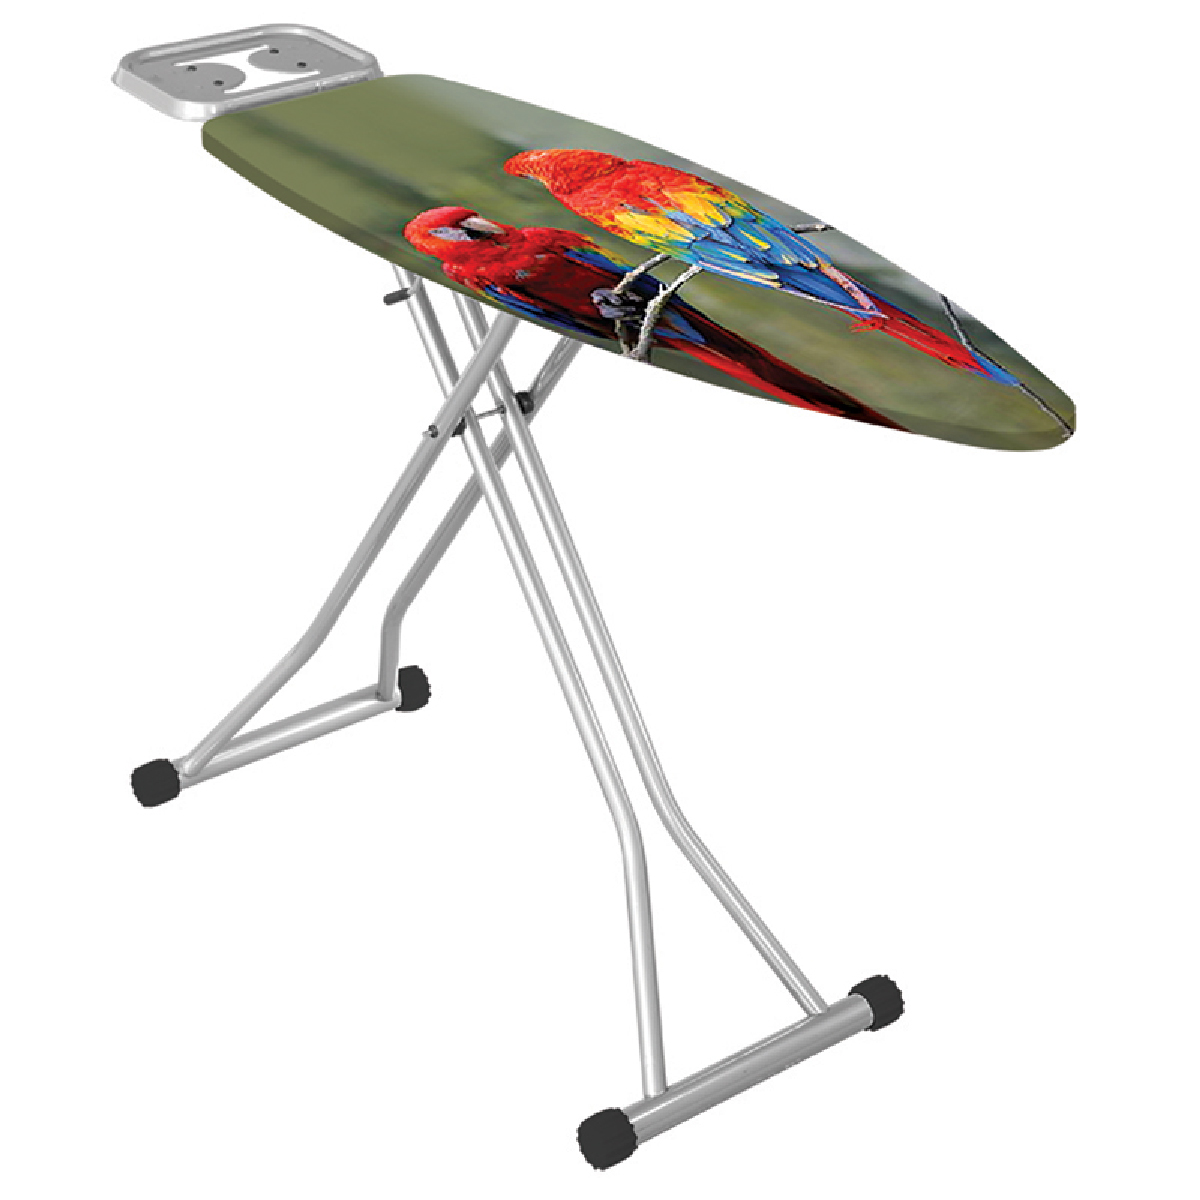 Dream Iron Board, Adjustable Height From 66 To 93Cm, Monoblock Ironing Surface, EGE 18318